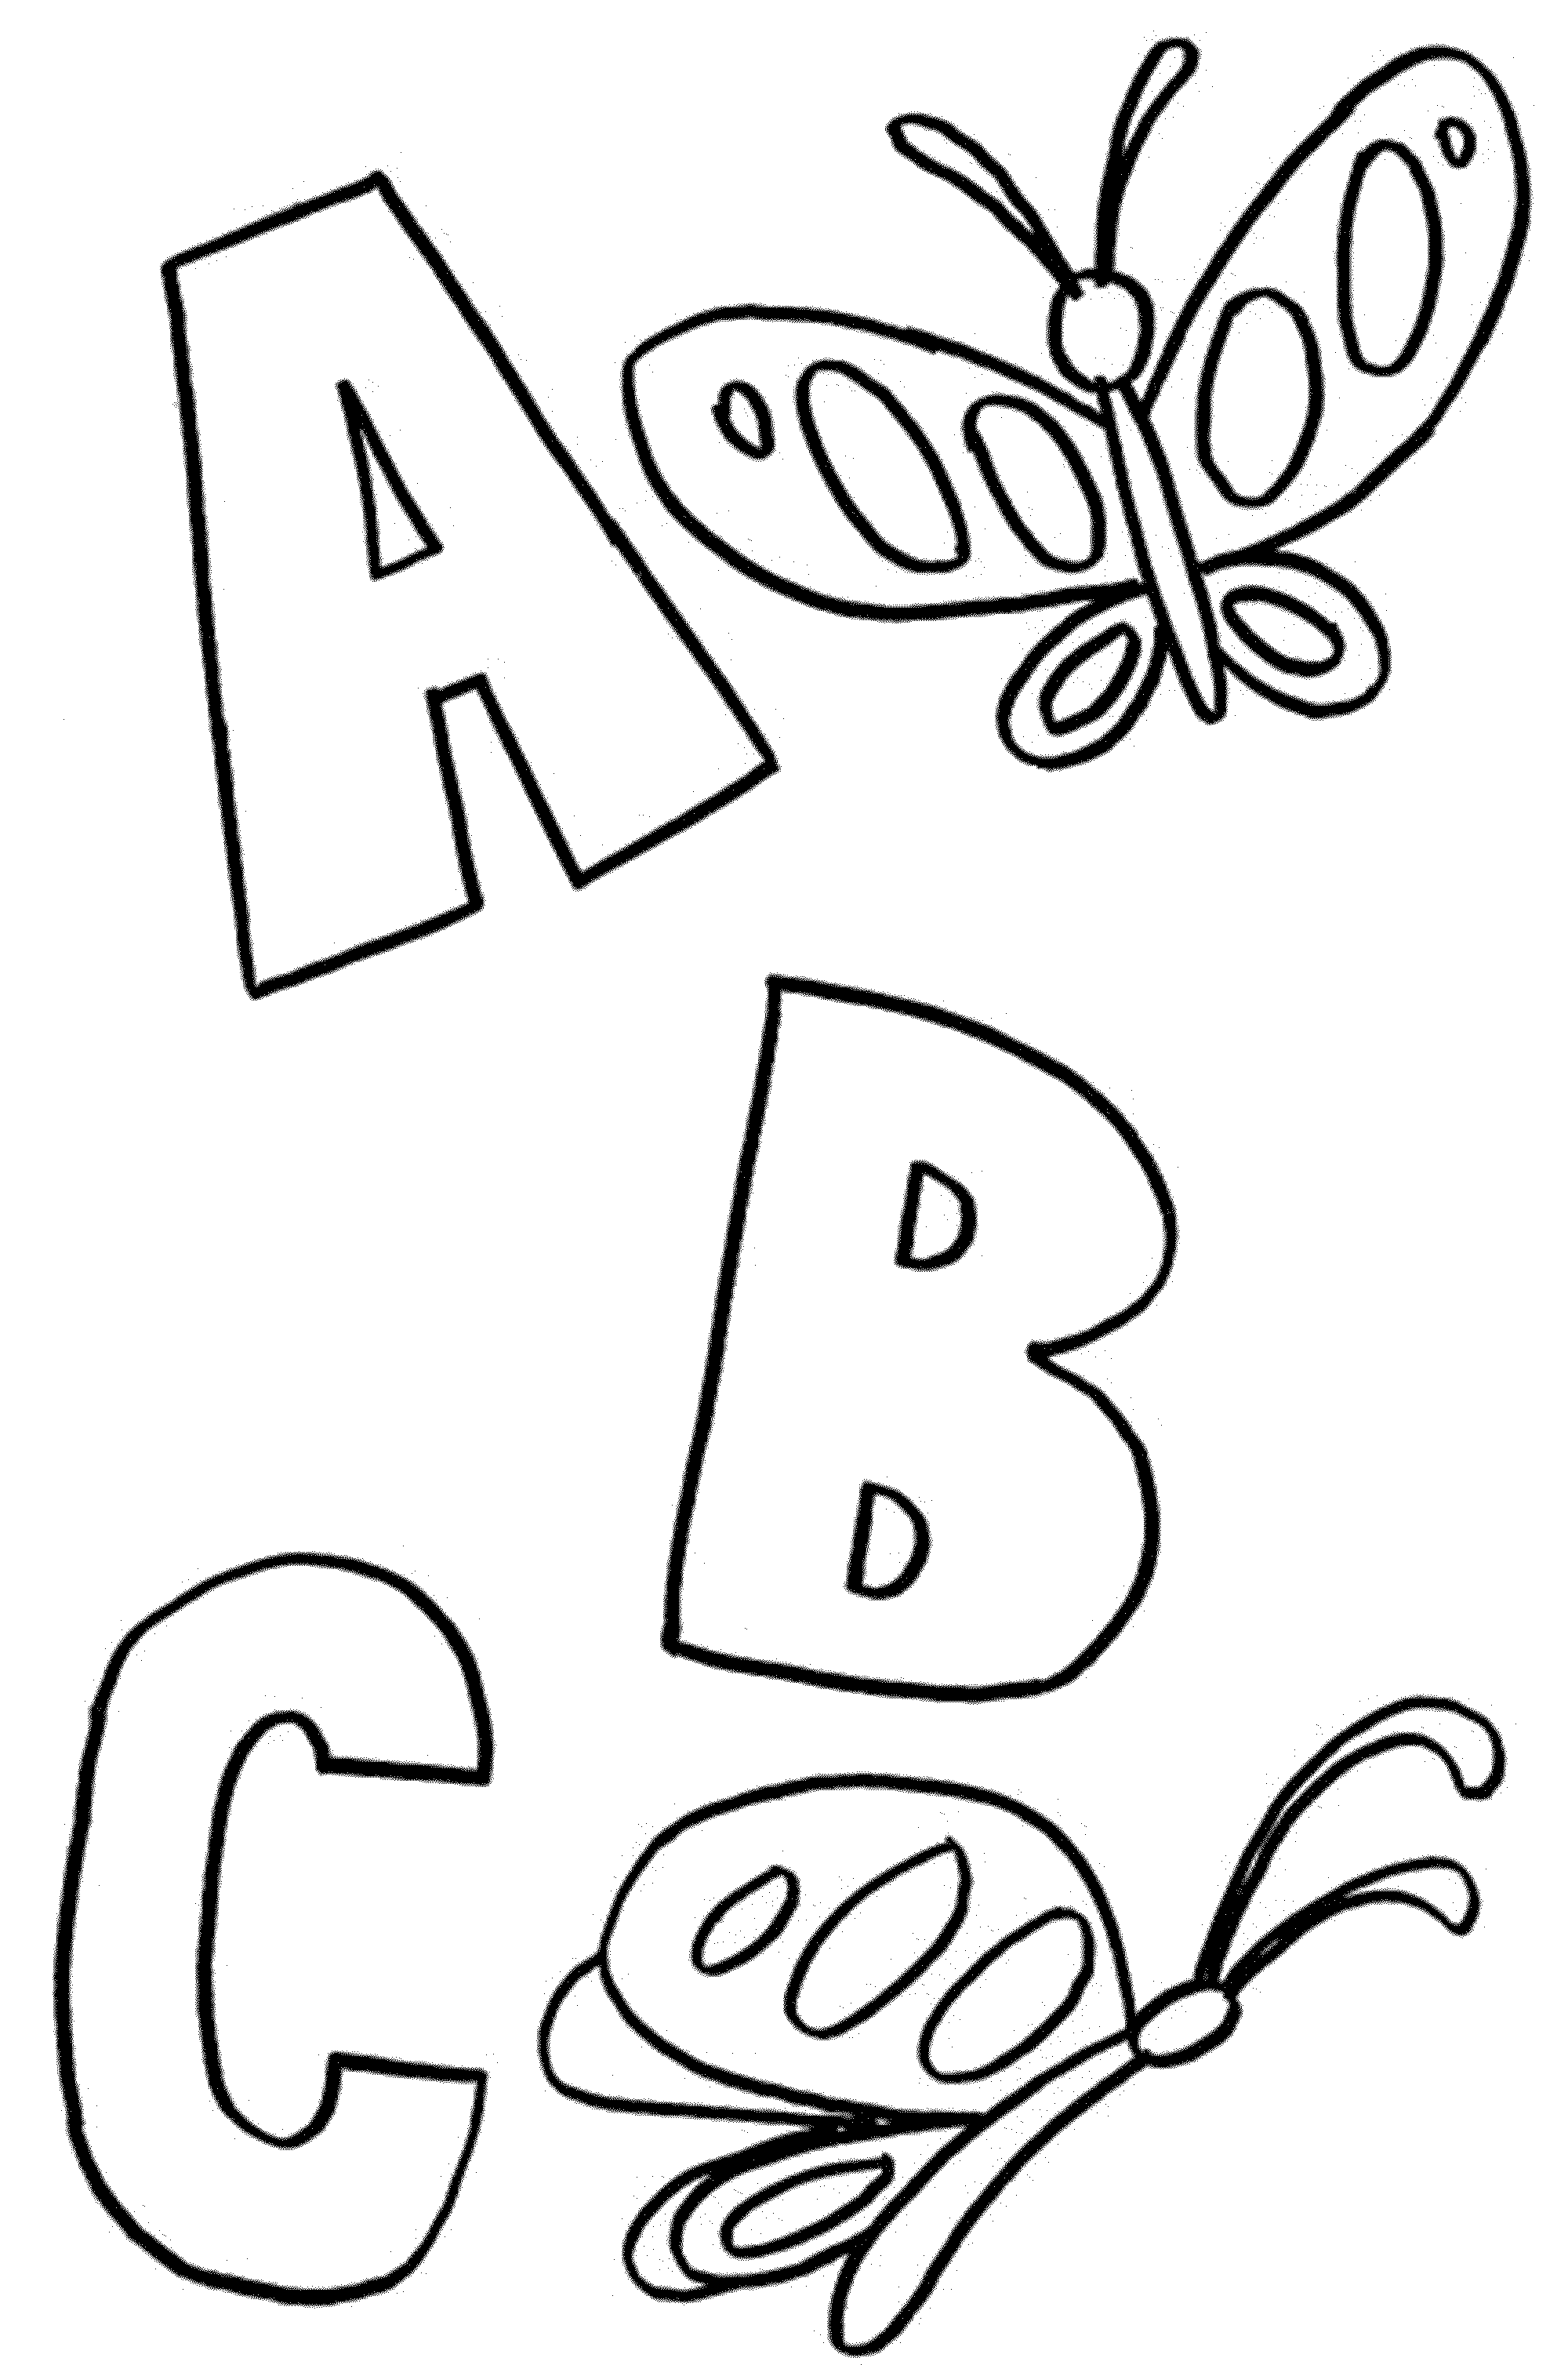 Alphabet Coloring Sheets For Toddlers